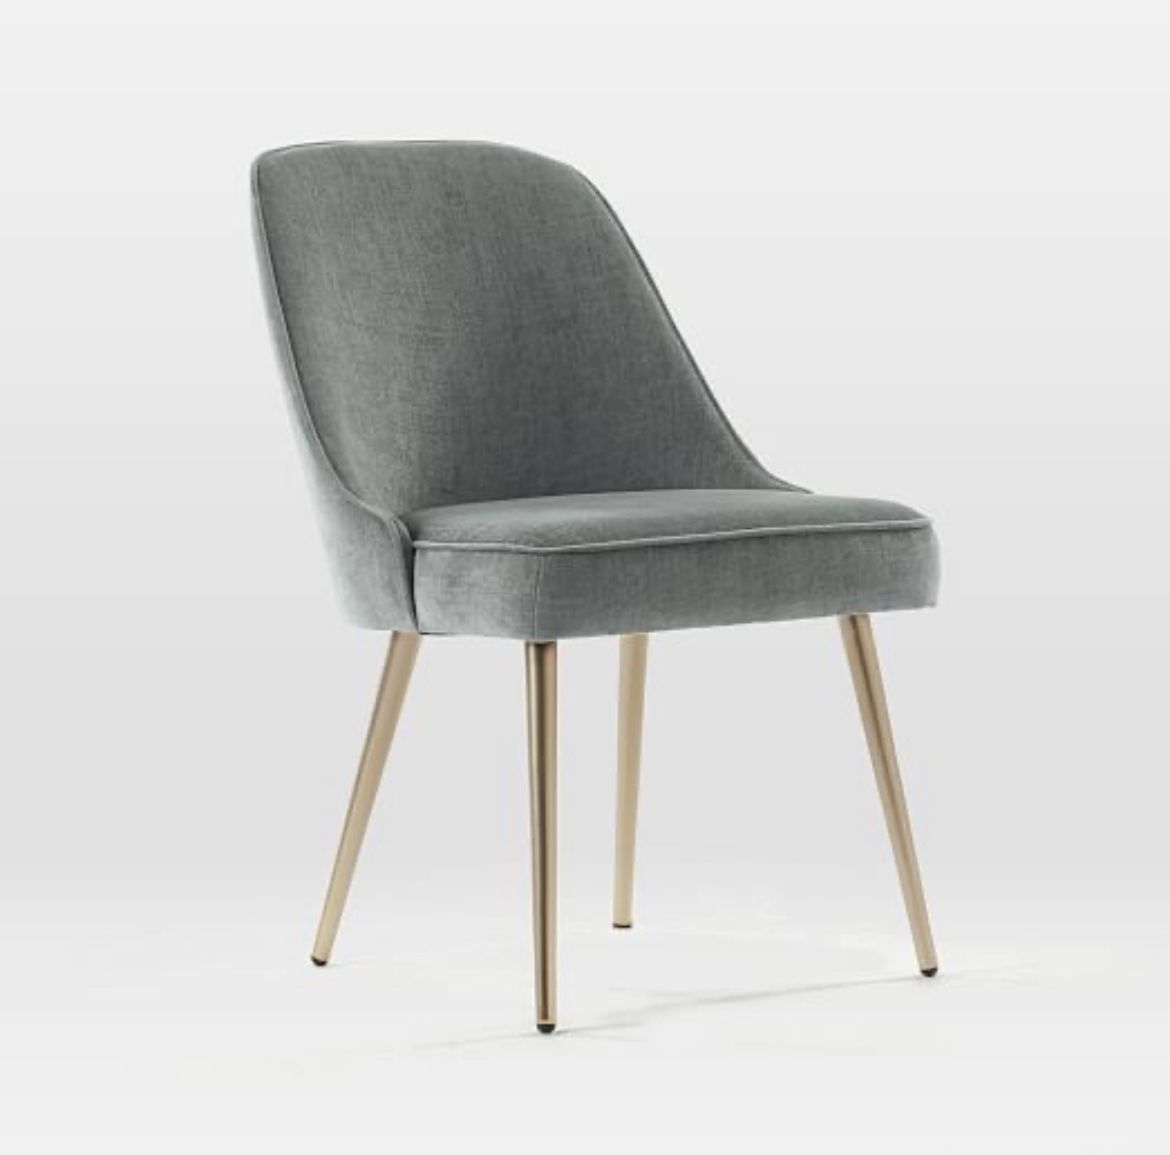 West Elm| Mid-Century Upholstered Dining Chairs -Metal Legs (Qty 2)